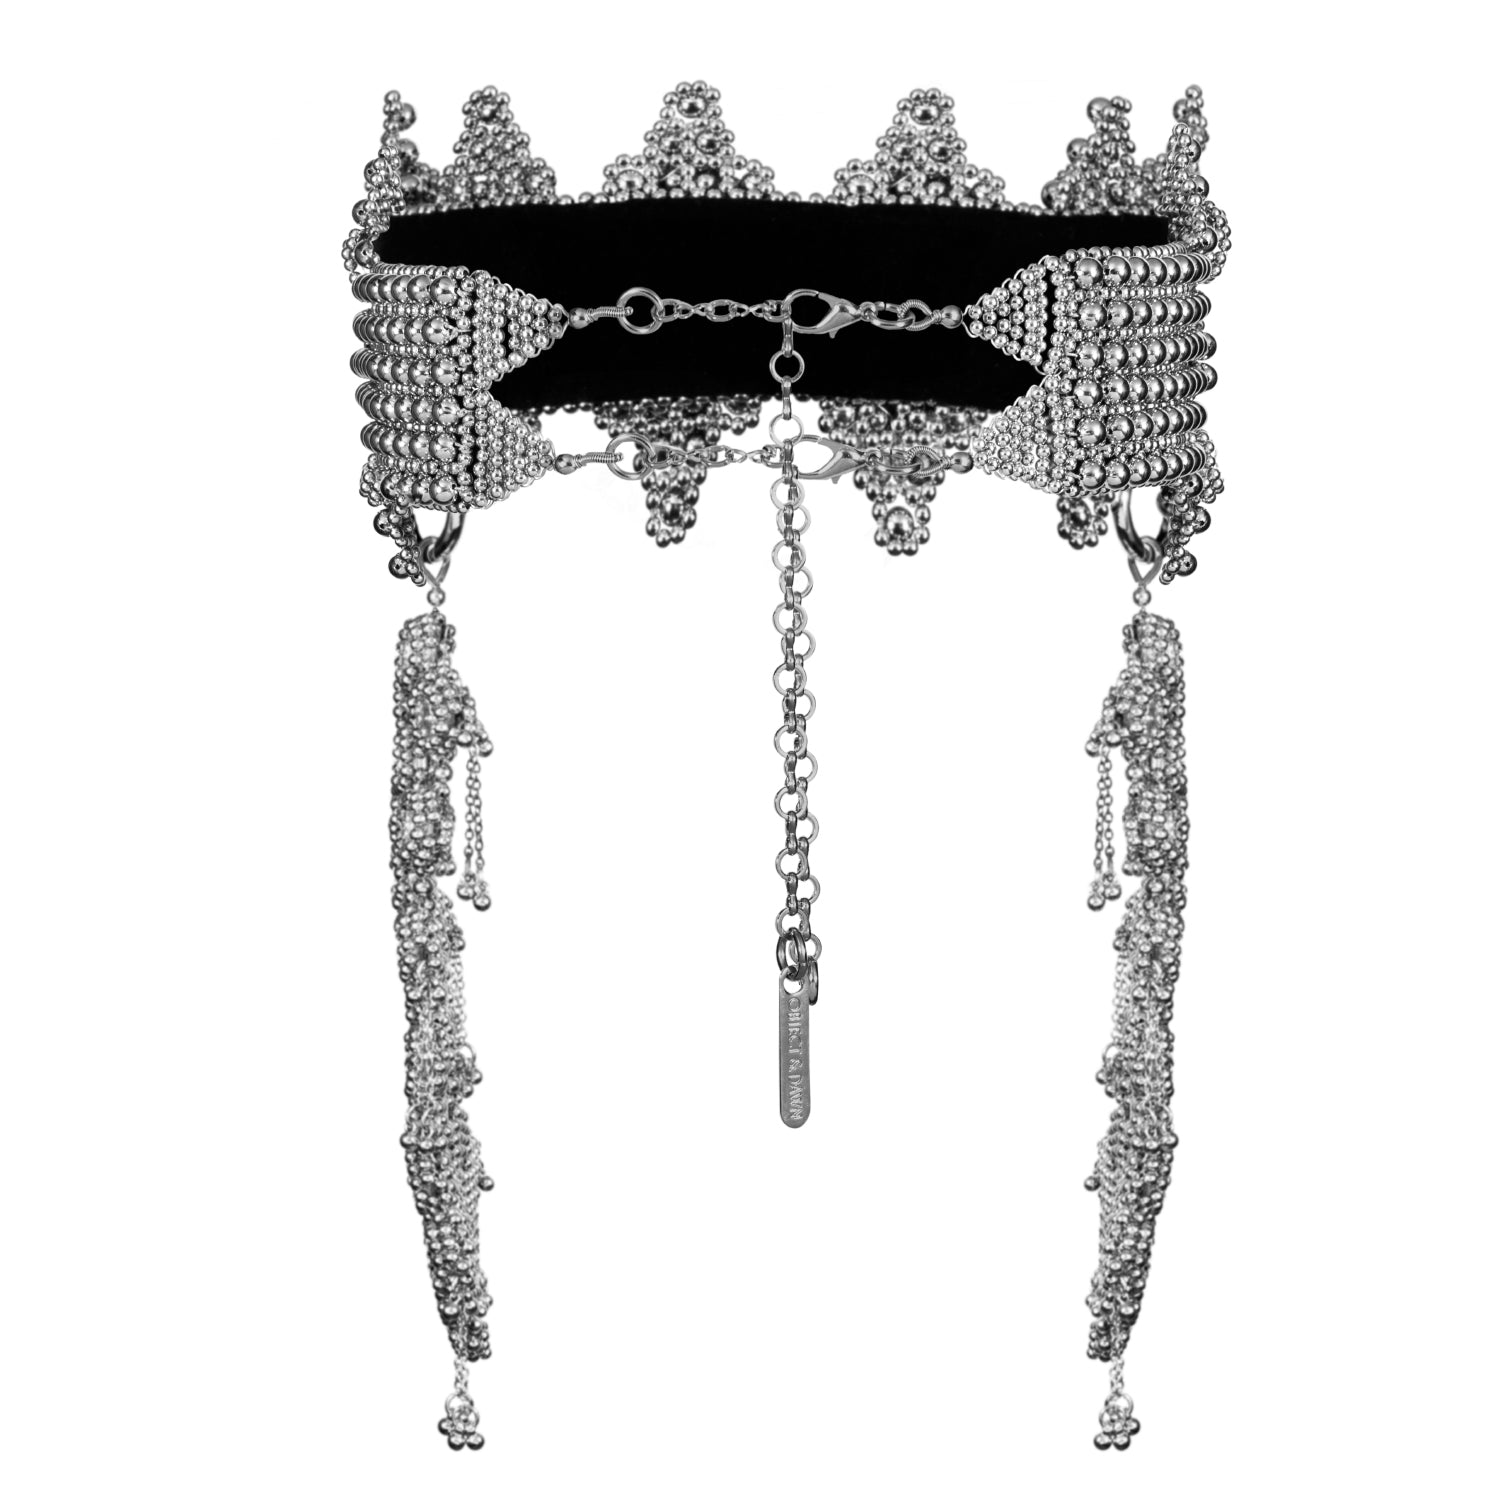 Sappho Crown in Silver with Reversible Clusters